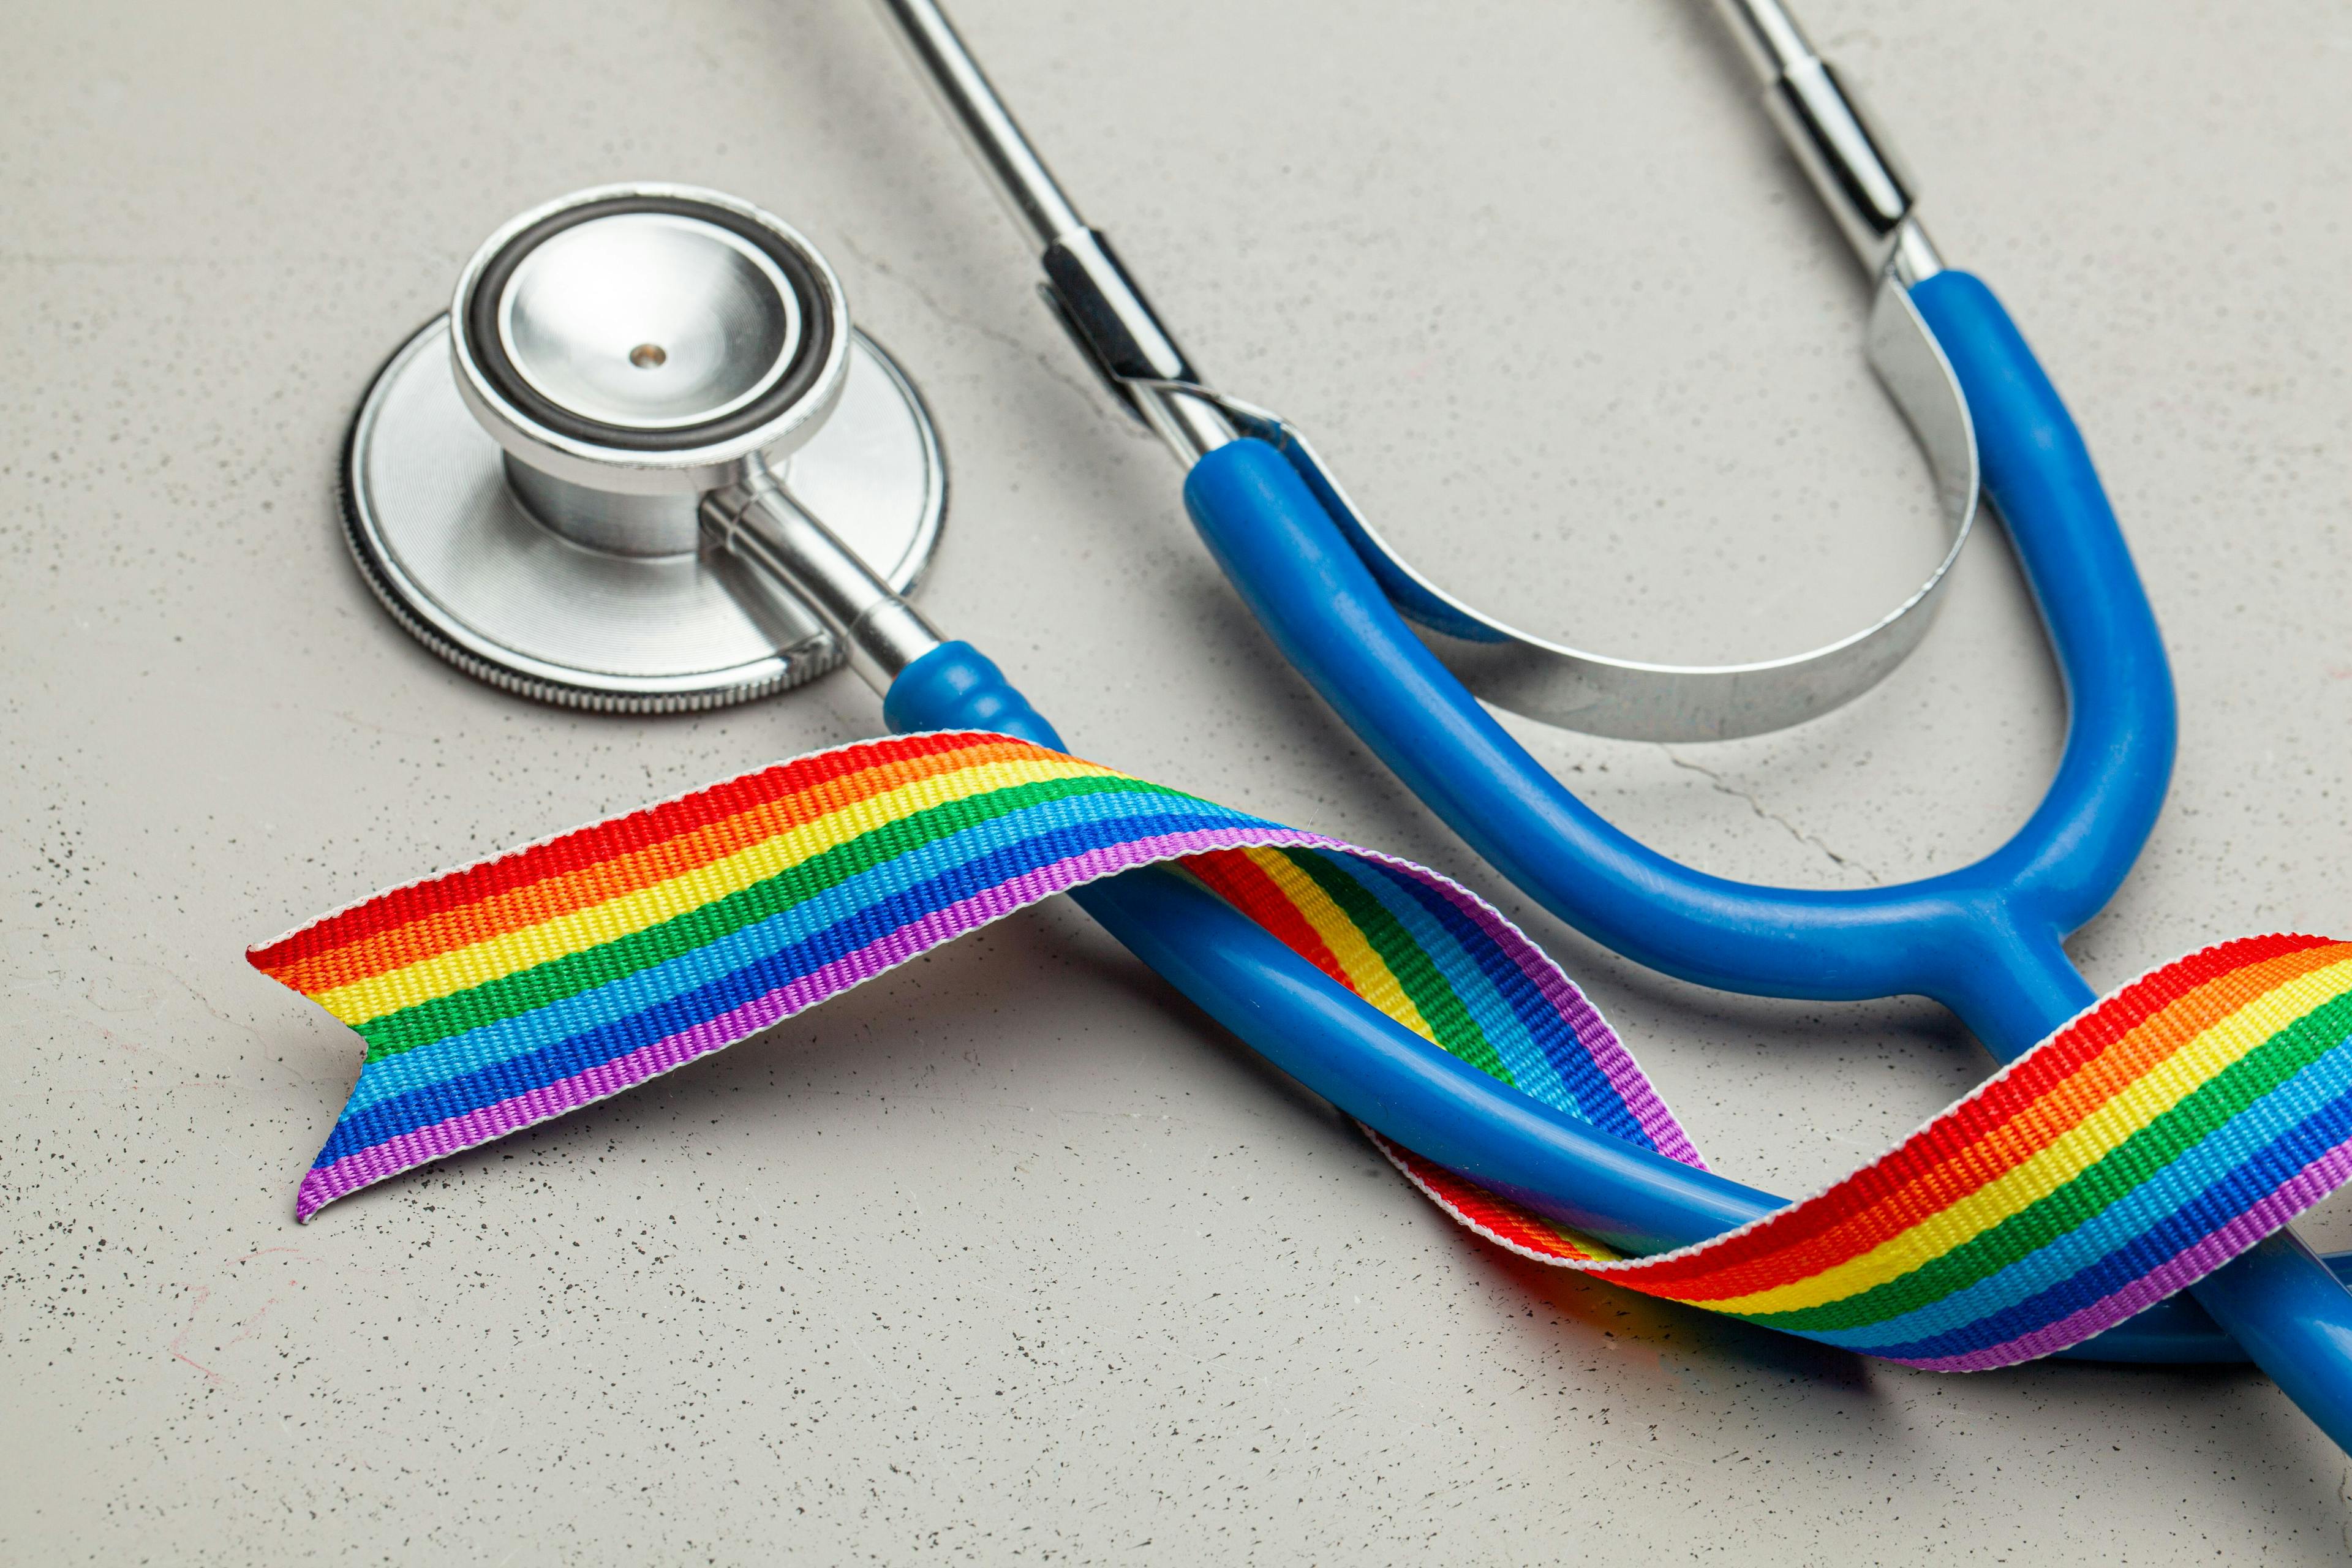 Key leaders in the oncology space discuss unique cancer risk factors, barriers to care, and ways in which institutions and organizations are creating more welcoming environments for individuals within the LGBTQ+ community.